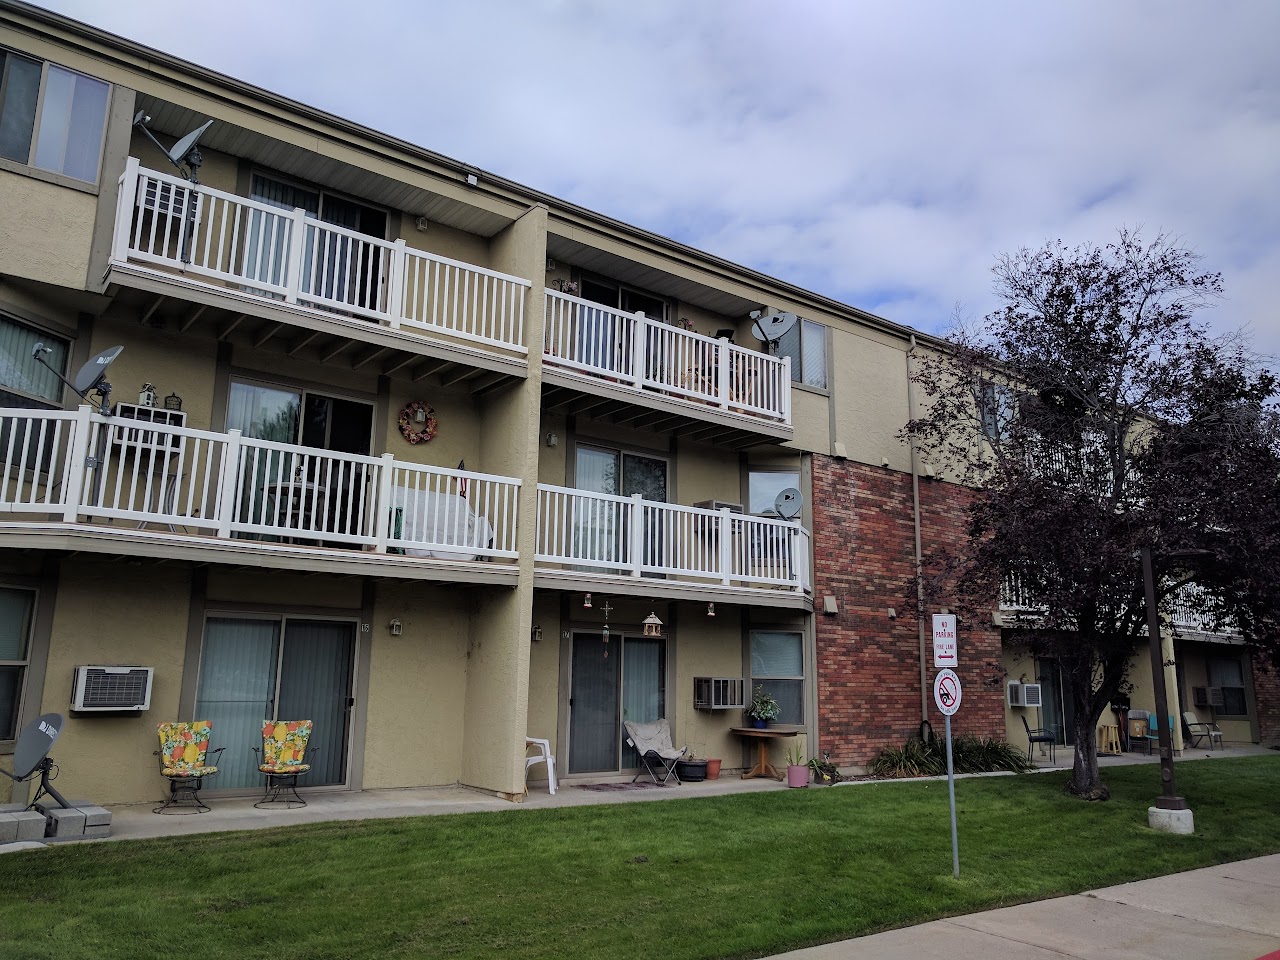 Photo of DOMINGUEZ PARK III. Affordable housing located at 3970 SOUTH 700 WEST SALT LAKE CITY, UT 84123